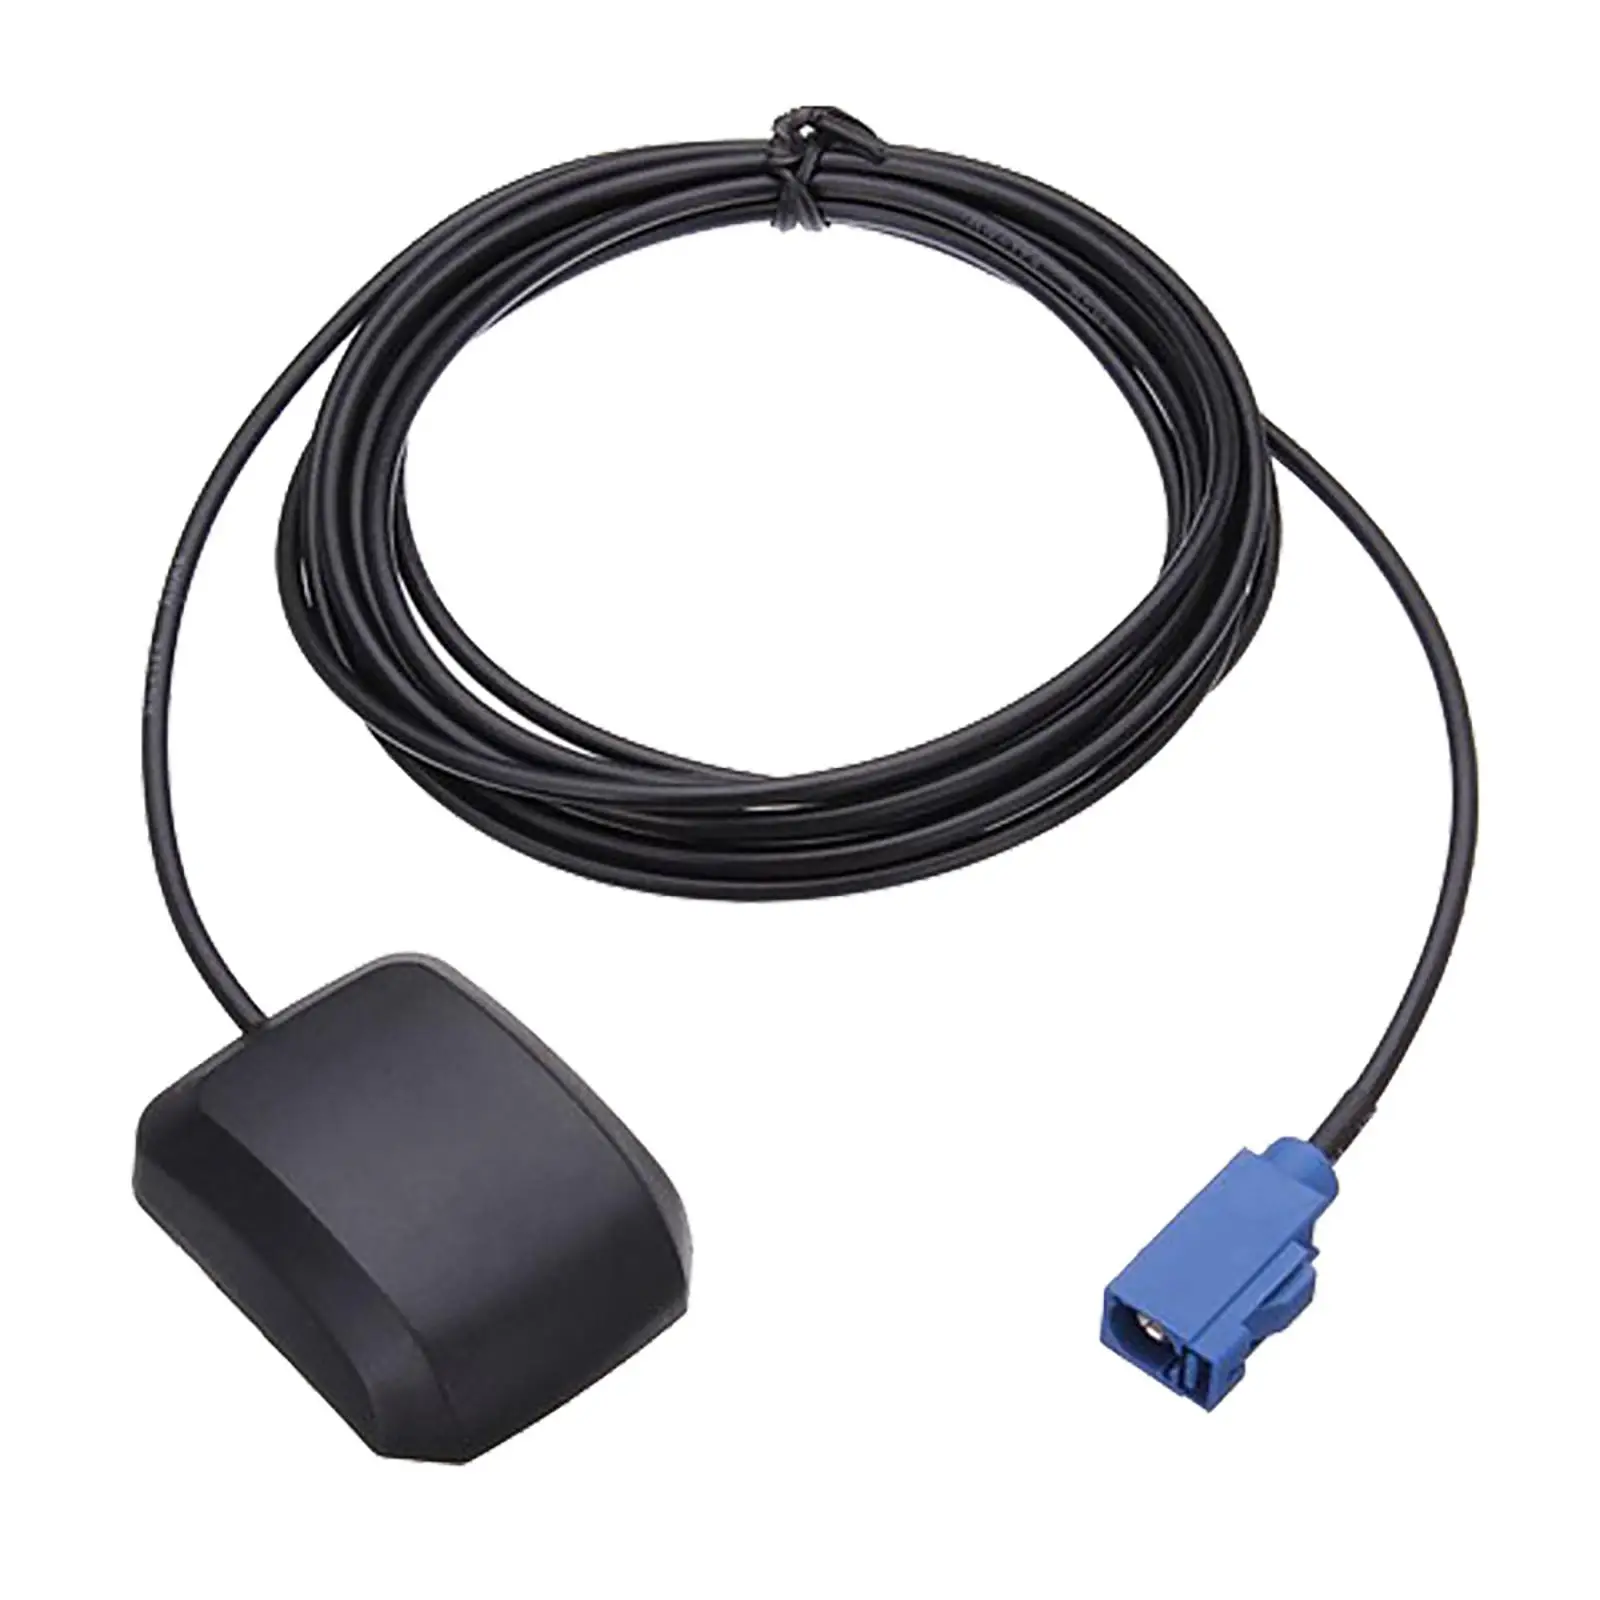 Vehicle Active Navigation with Male Connector Locator for Car Stereo Marine Parts